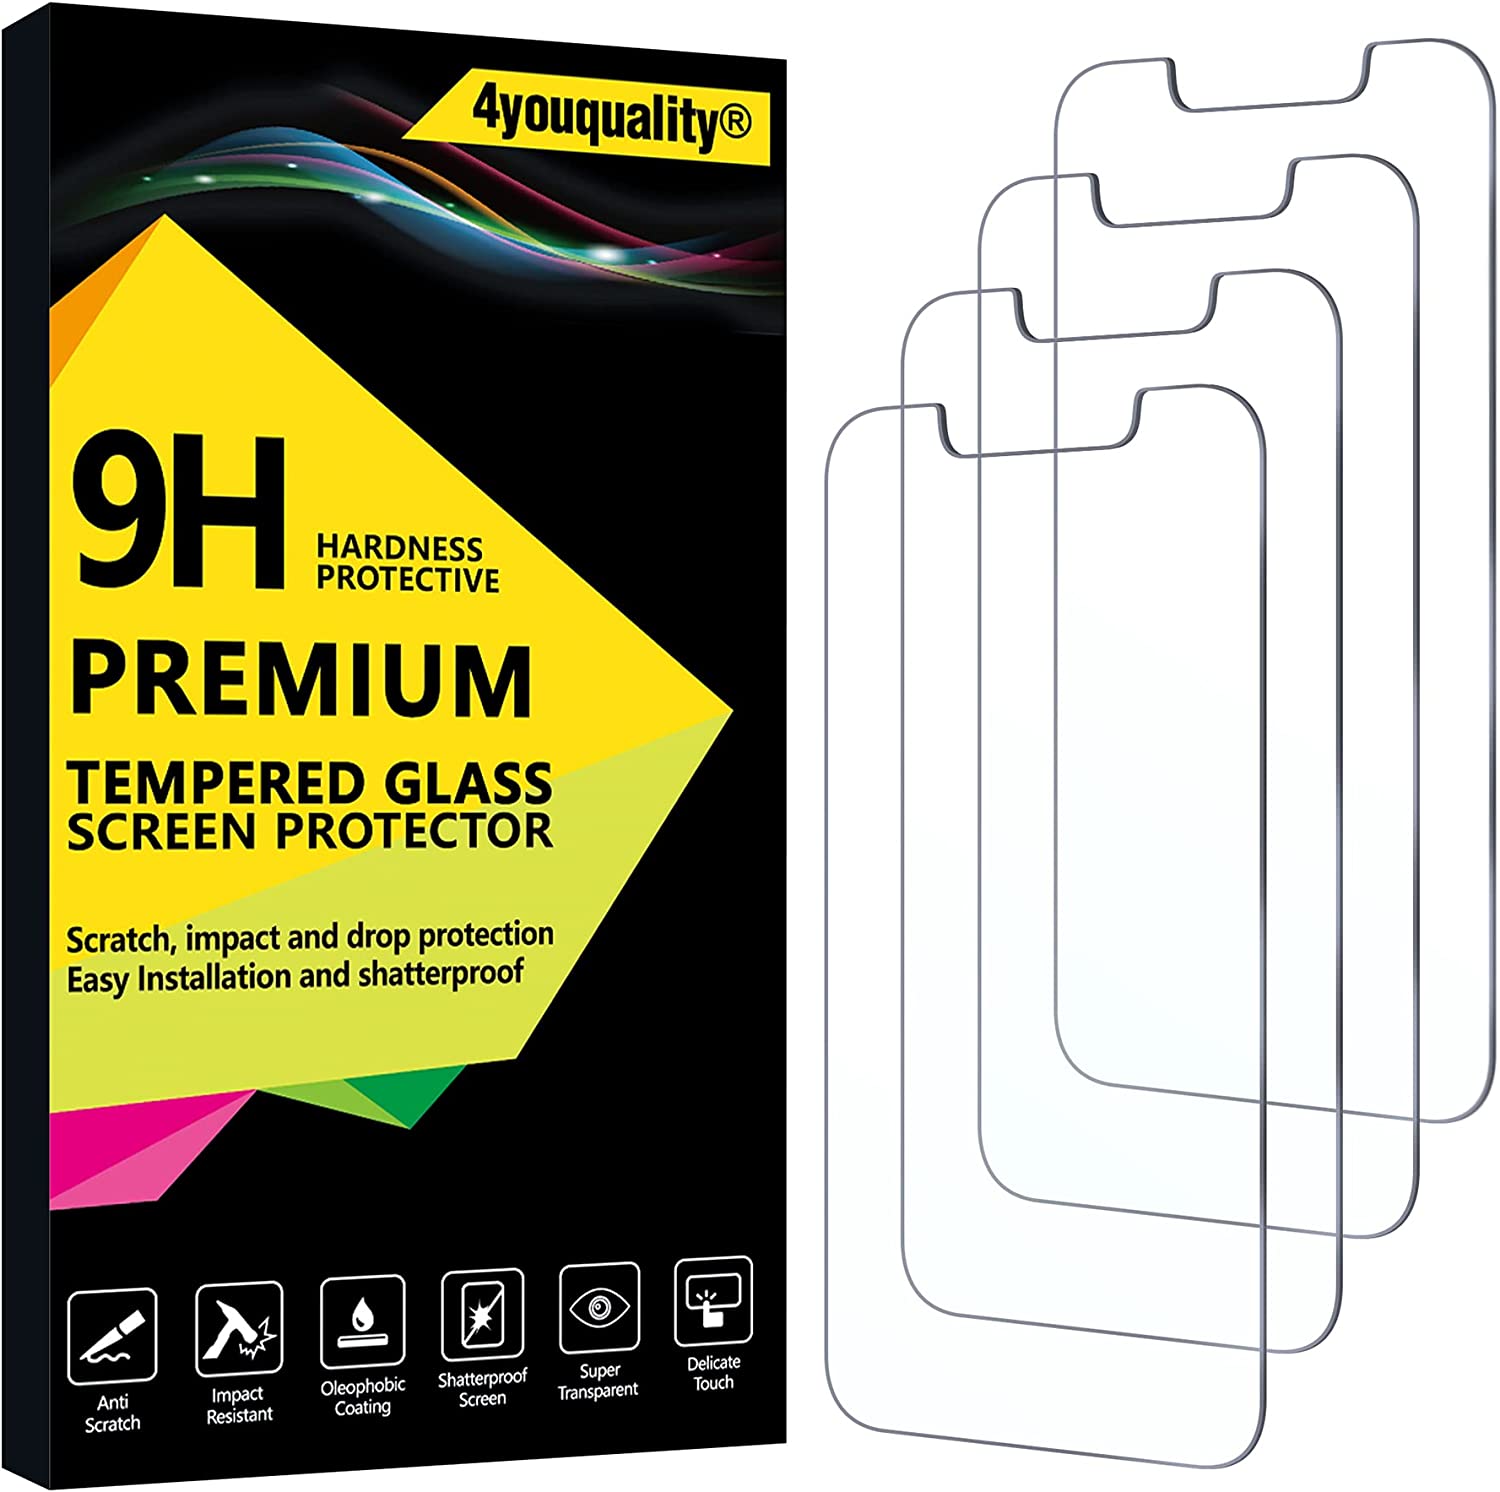 4YouQuality 9H Premium Tempered Glass Screen Protector 4 Pack for Iphone 13 & Pro RRP £4.99 CLEARANCE XL £3.49